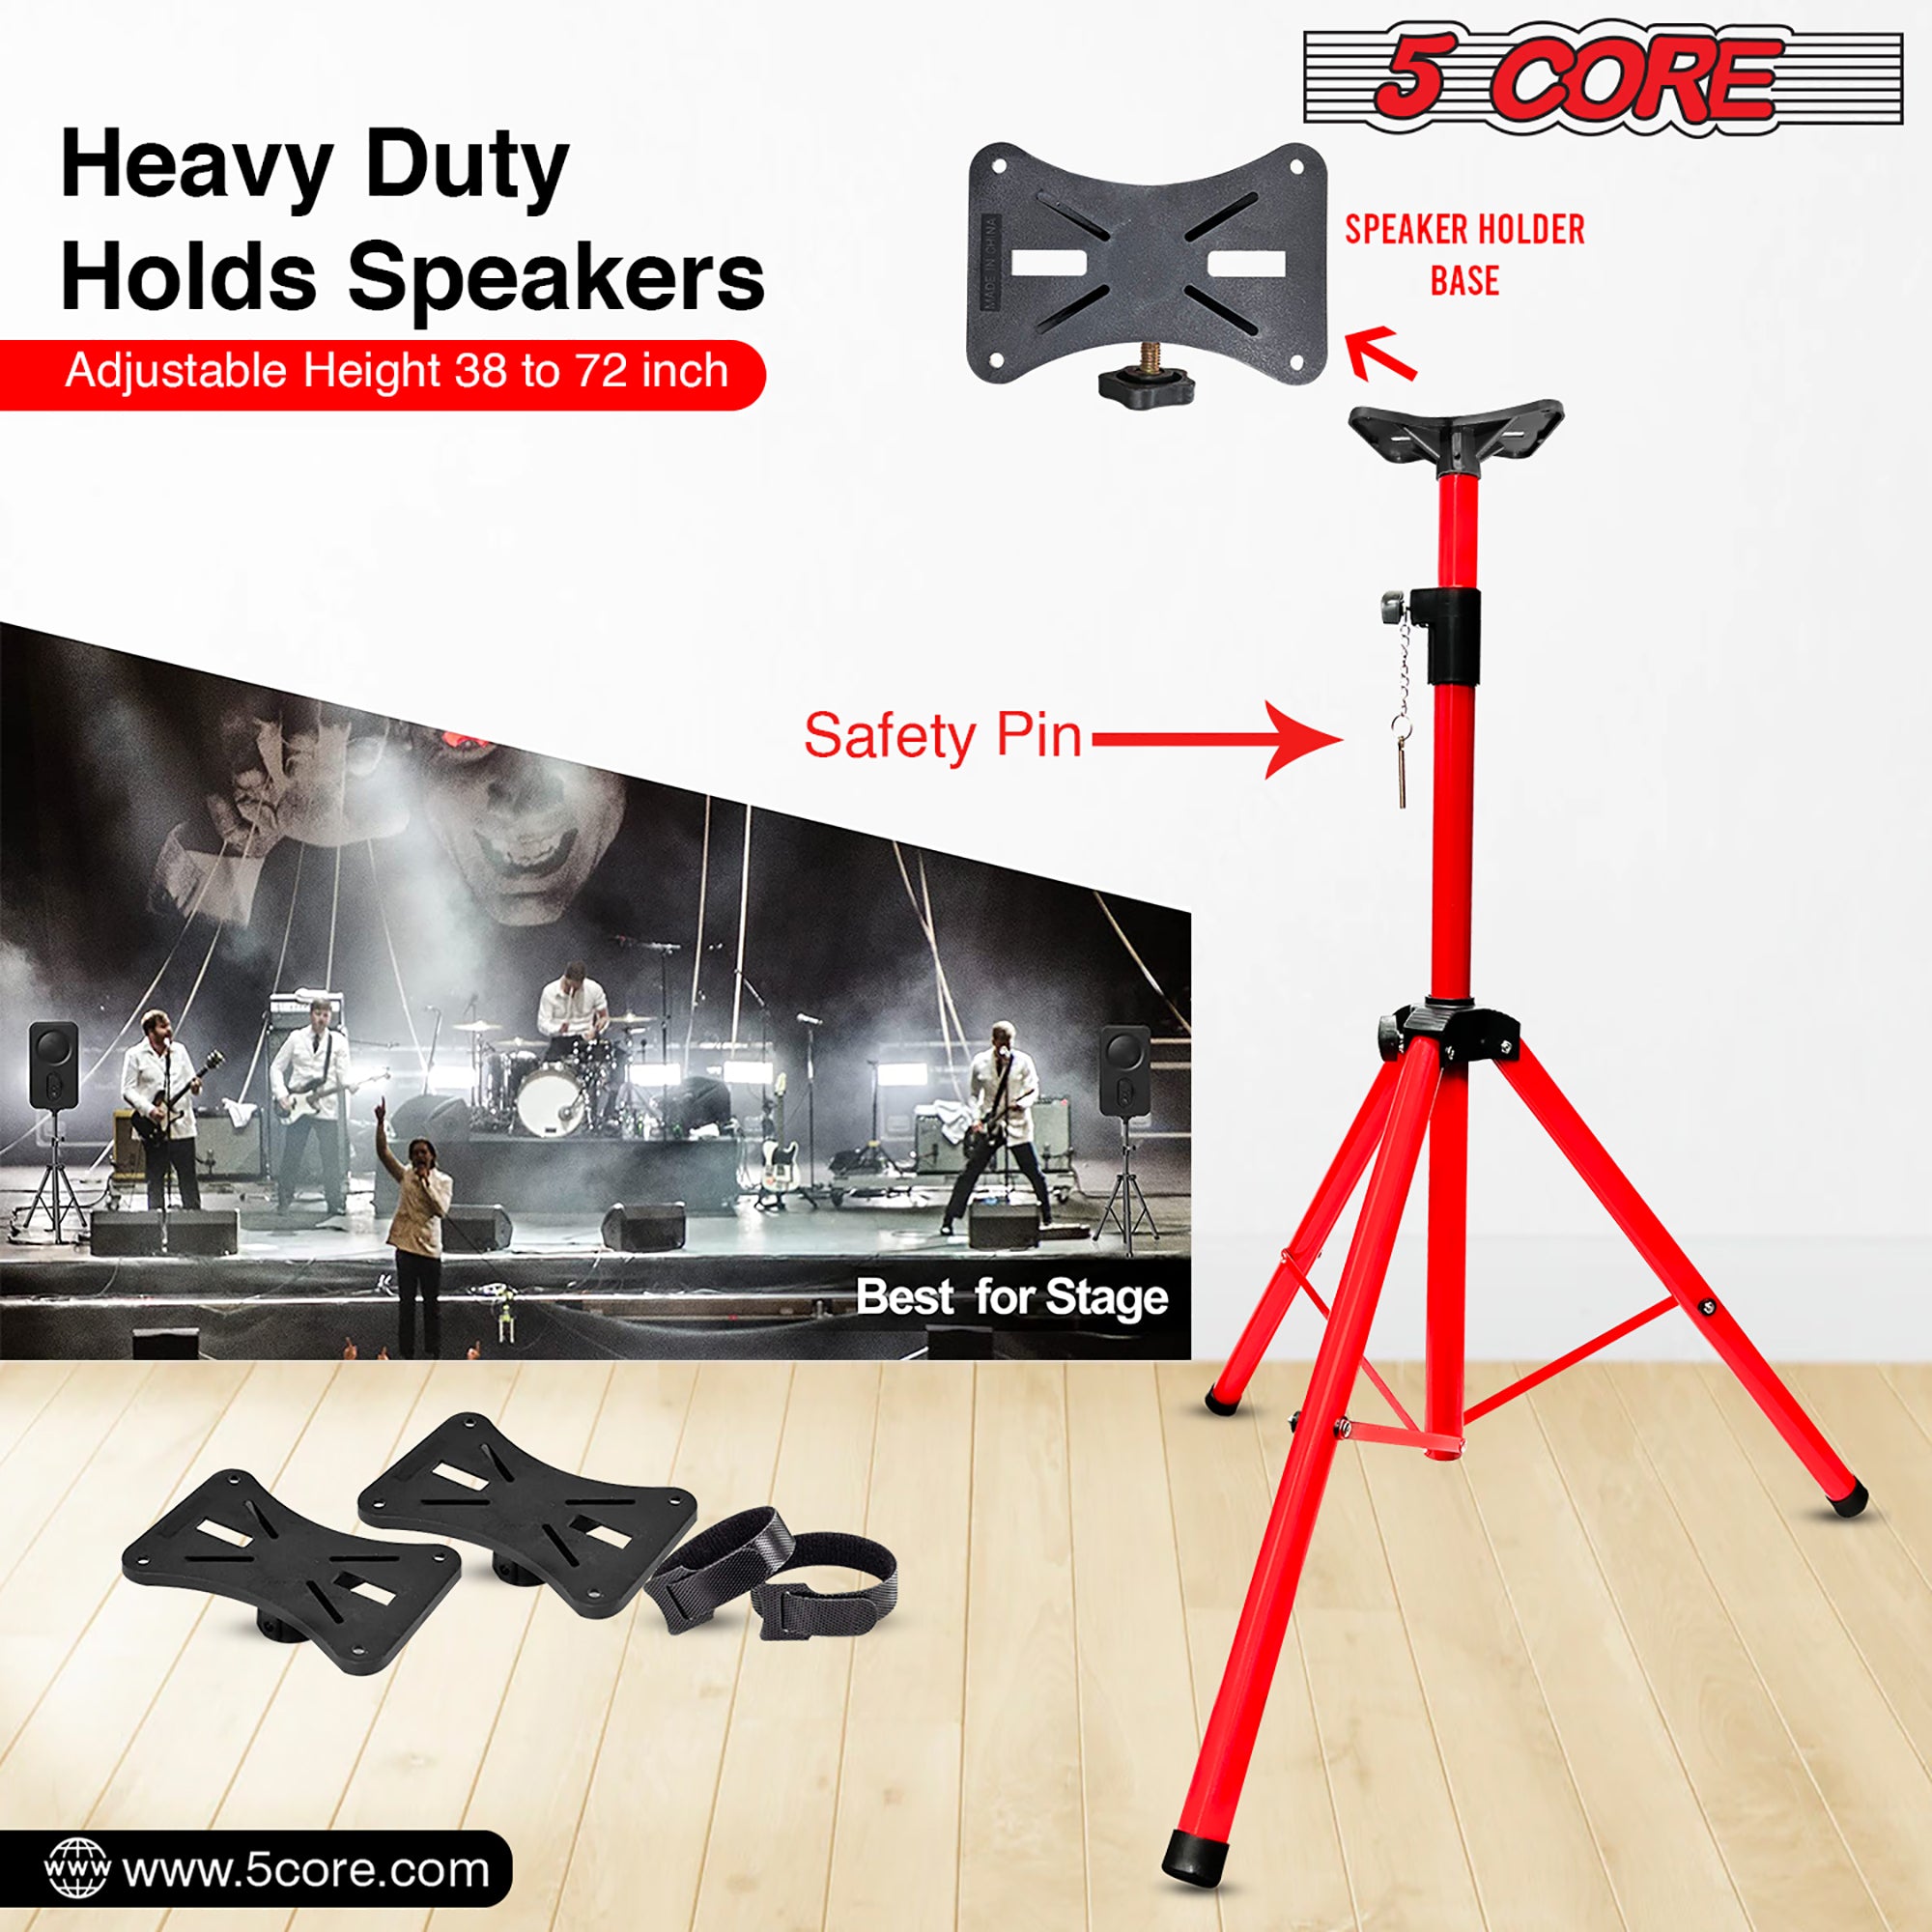 Heavy duty holds speakers stand